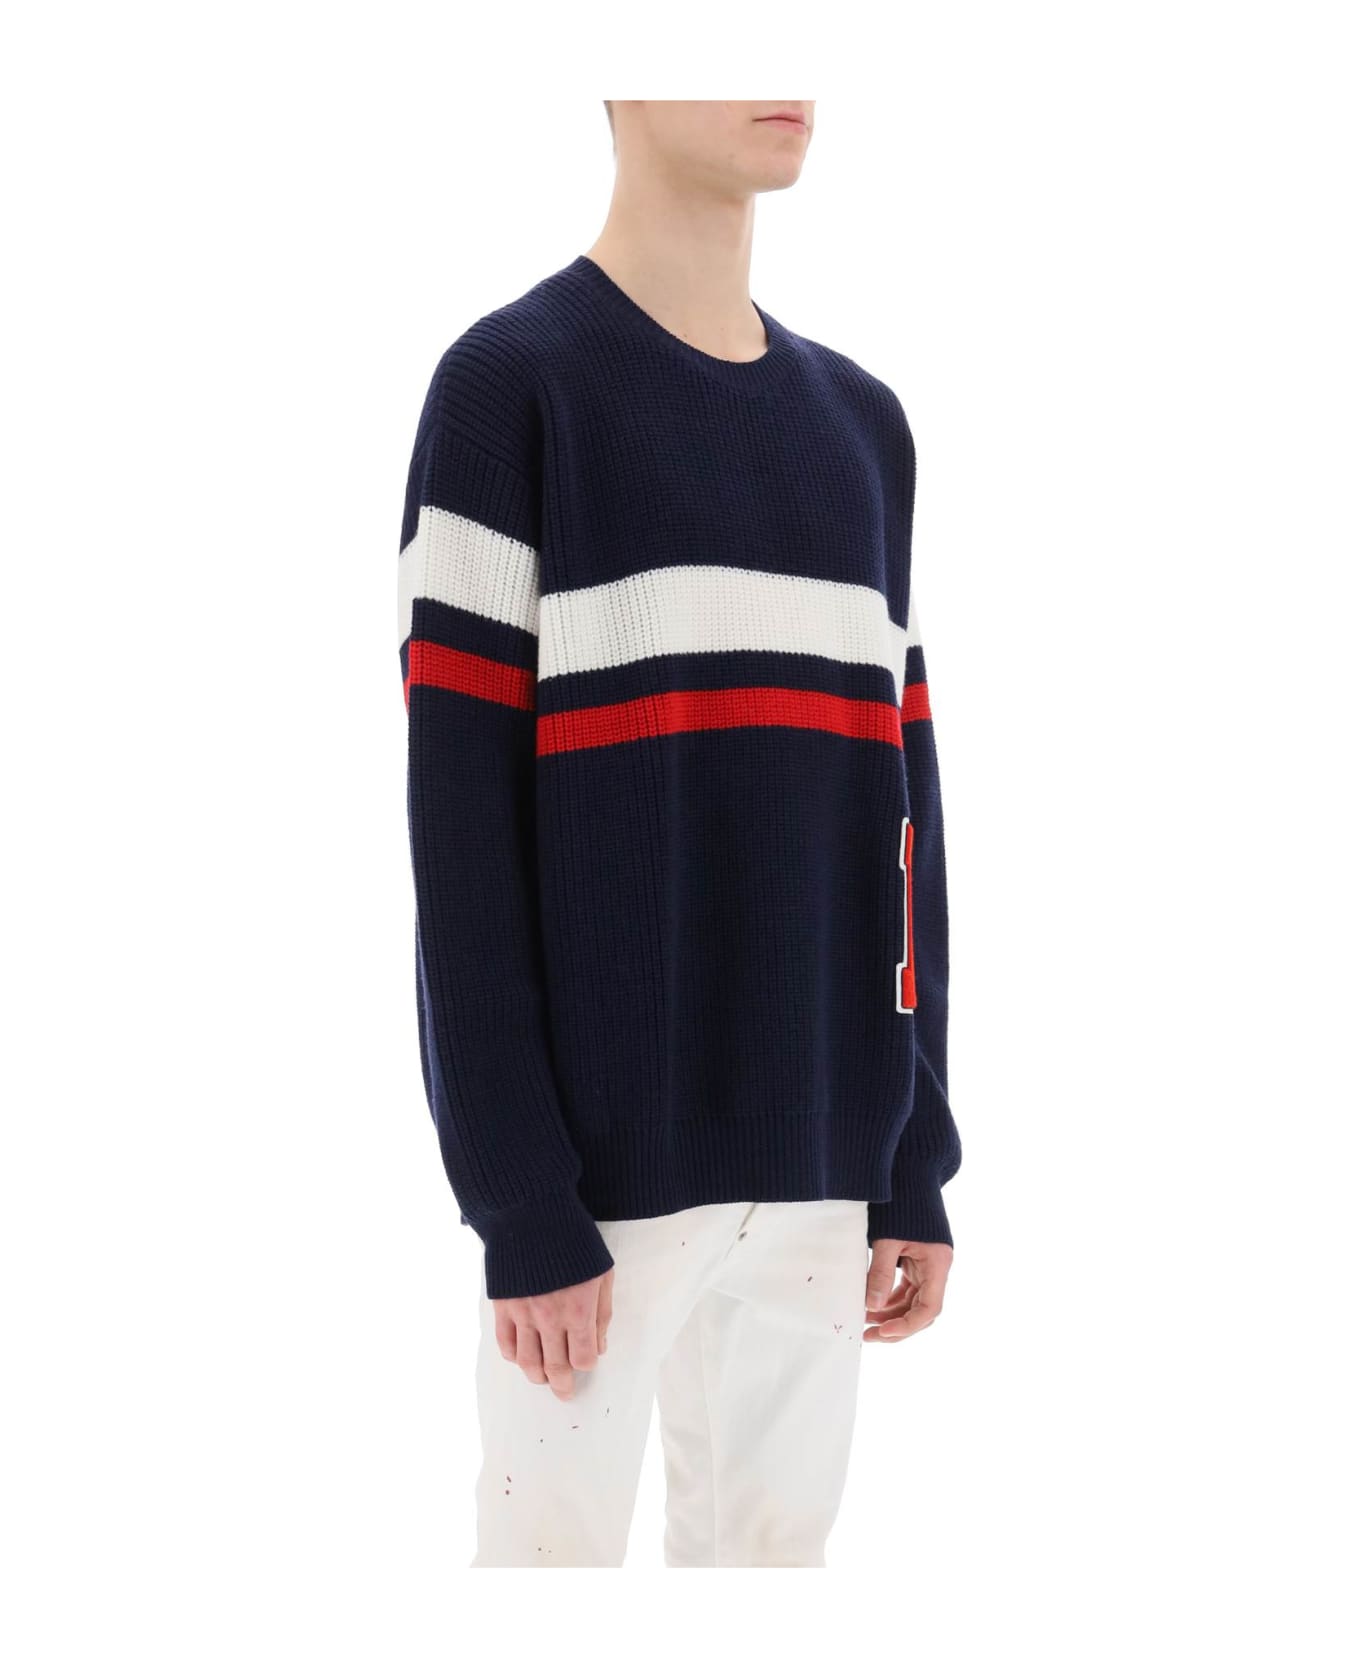 Dsquared2 Wool Sweater With Varsity Patch - BLUE WHITE RED (Blue)